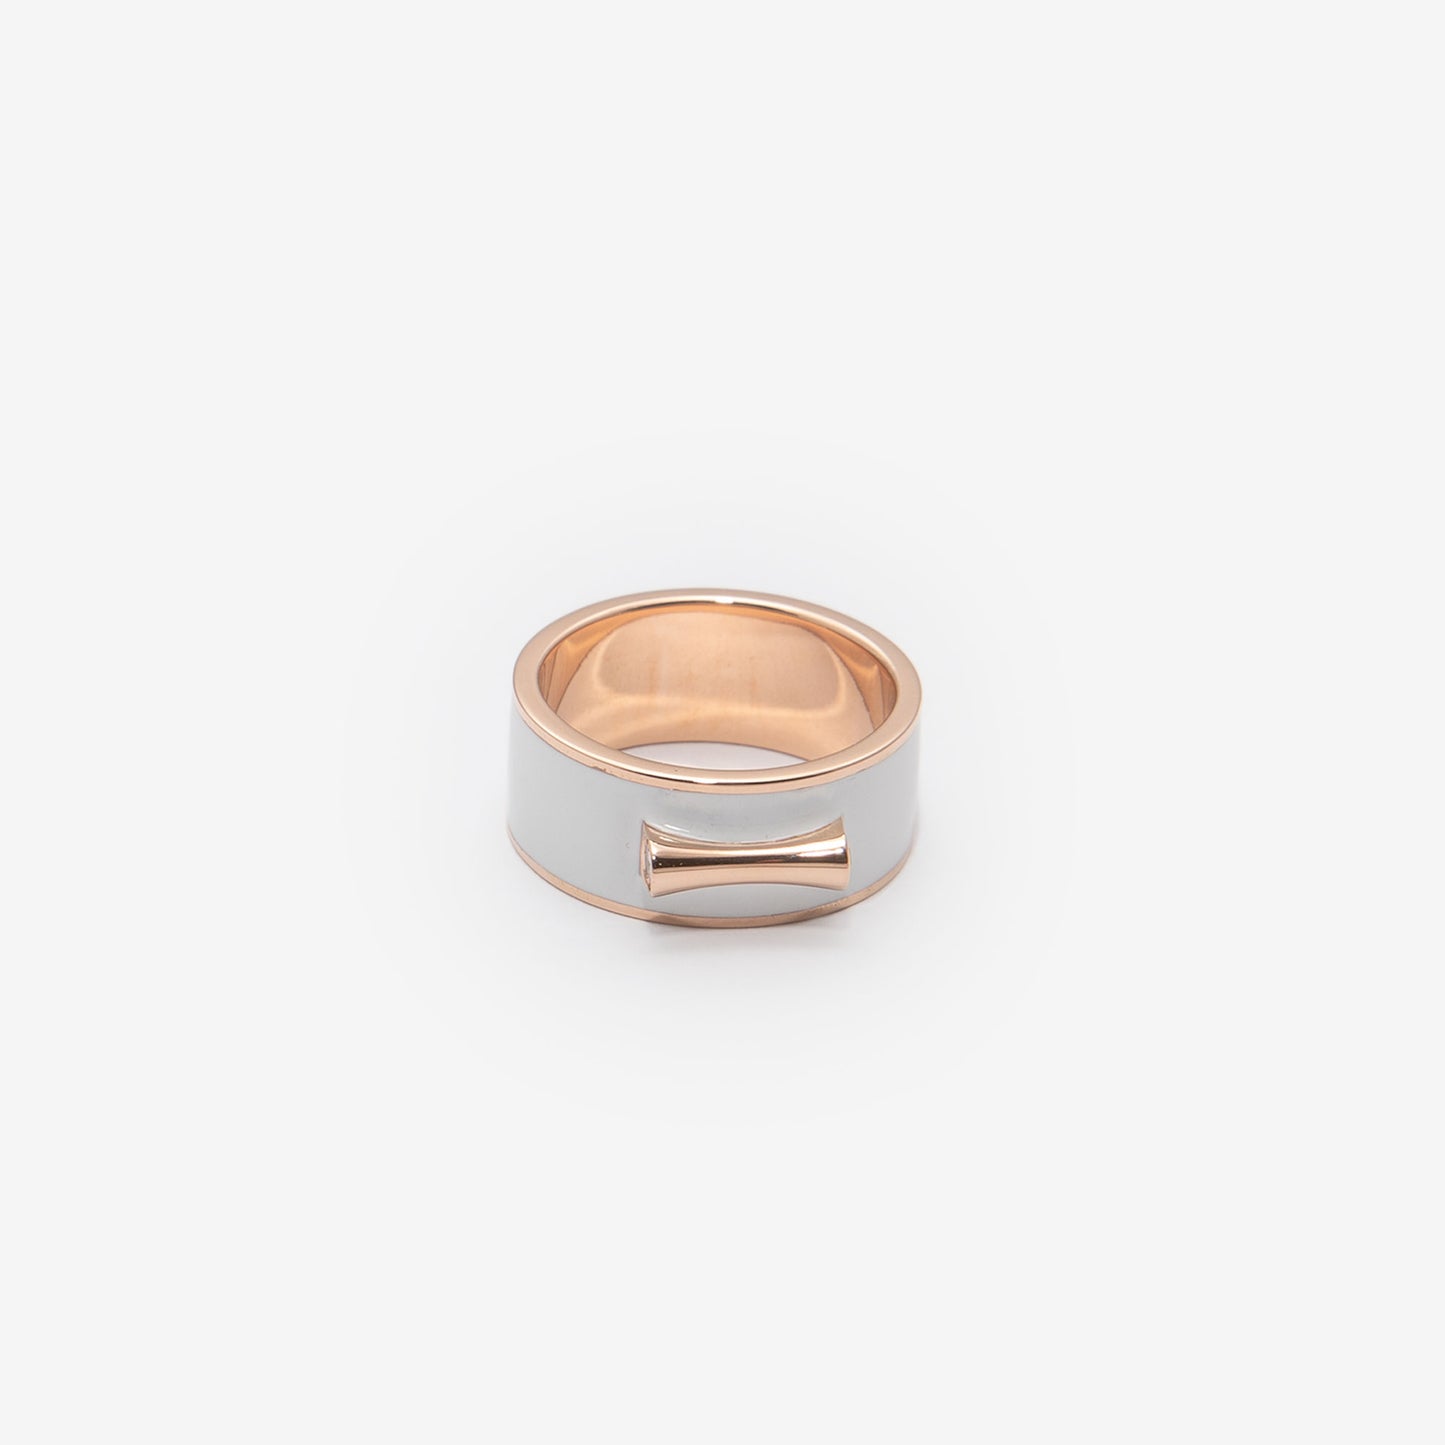 Gold band ring with enamel and diamonds